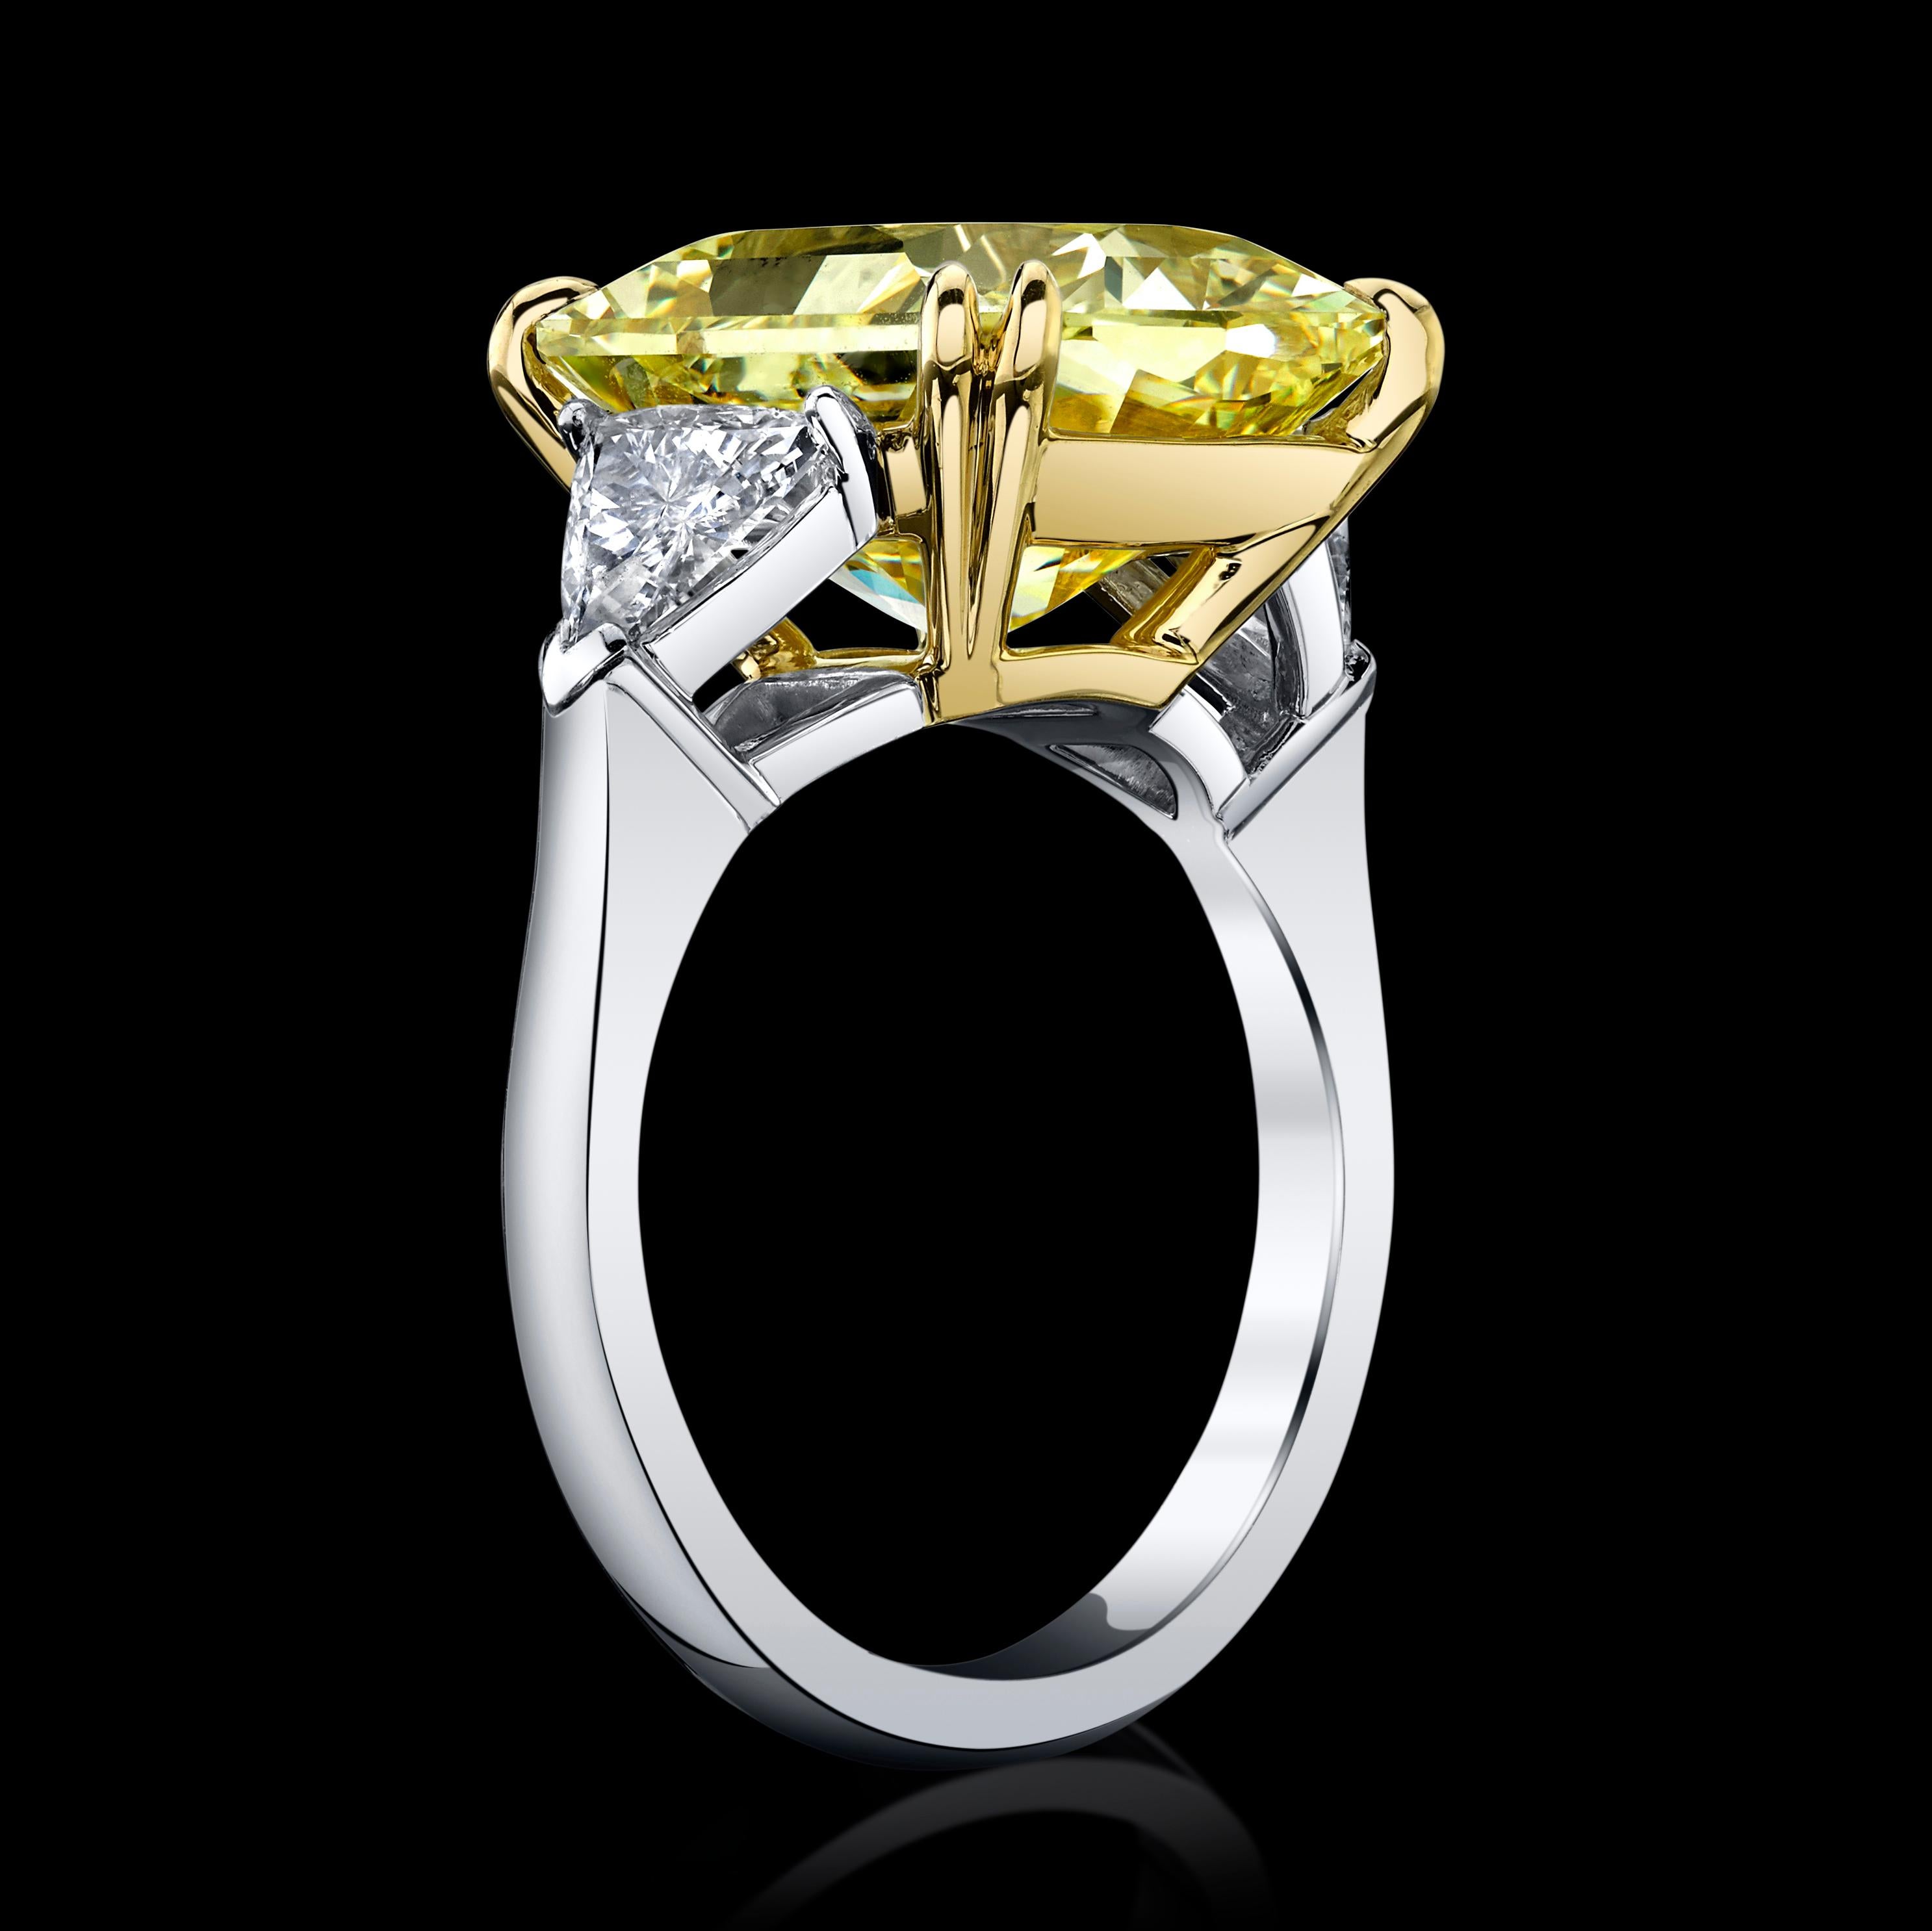 A strong color fancy intense large yellow diamond set in a classic platinum ring mounting with two trapezoids side diamonds. With a Fancy Intense and VVS2 grading, this is a high-end jewel to be cherished and enjoyed for years. The center stone is